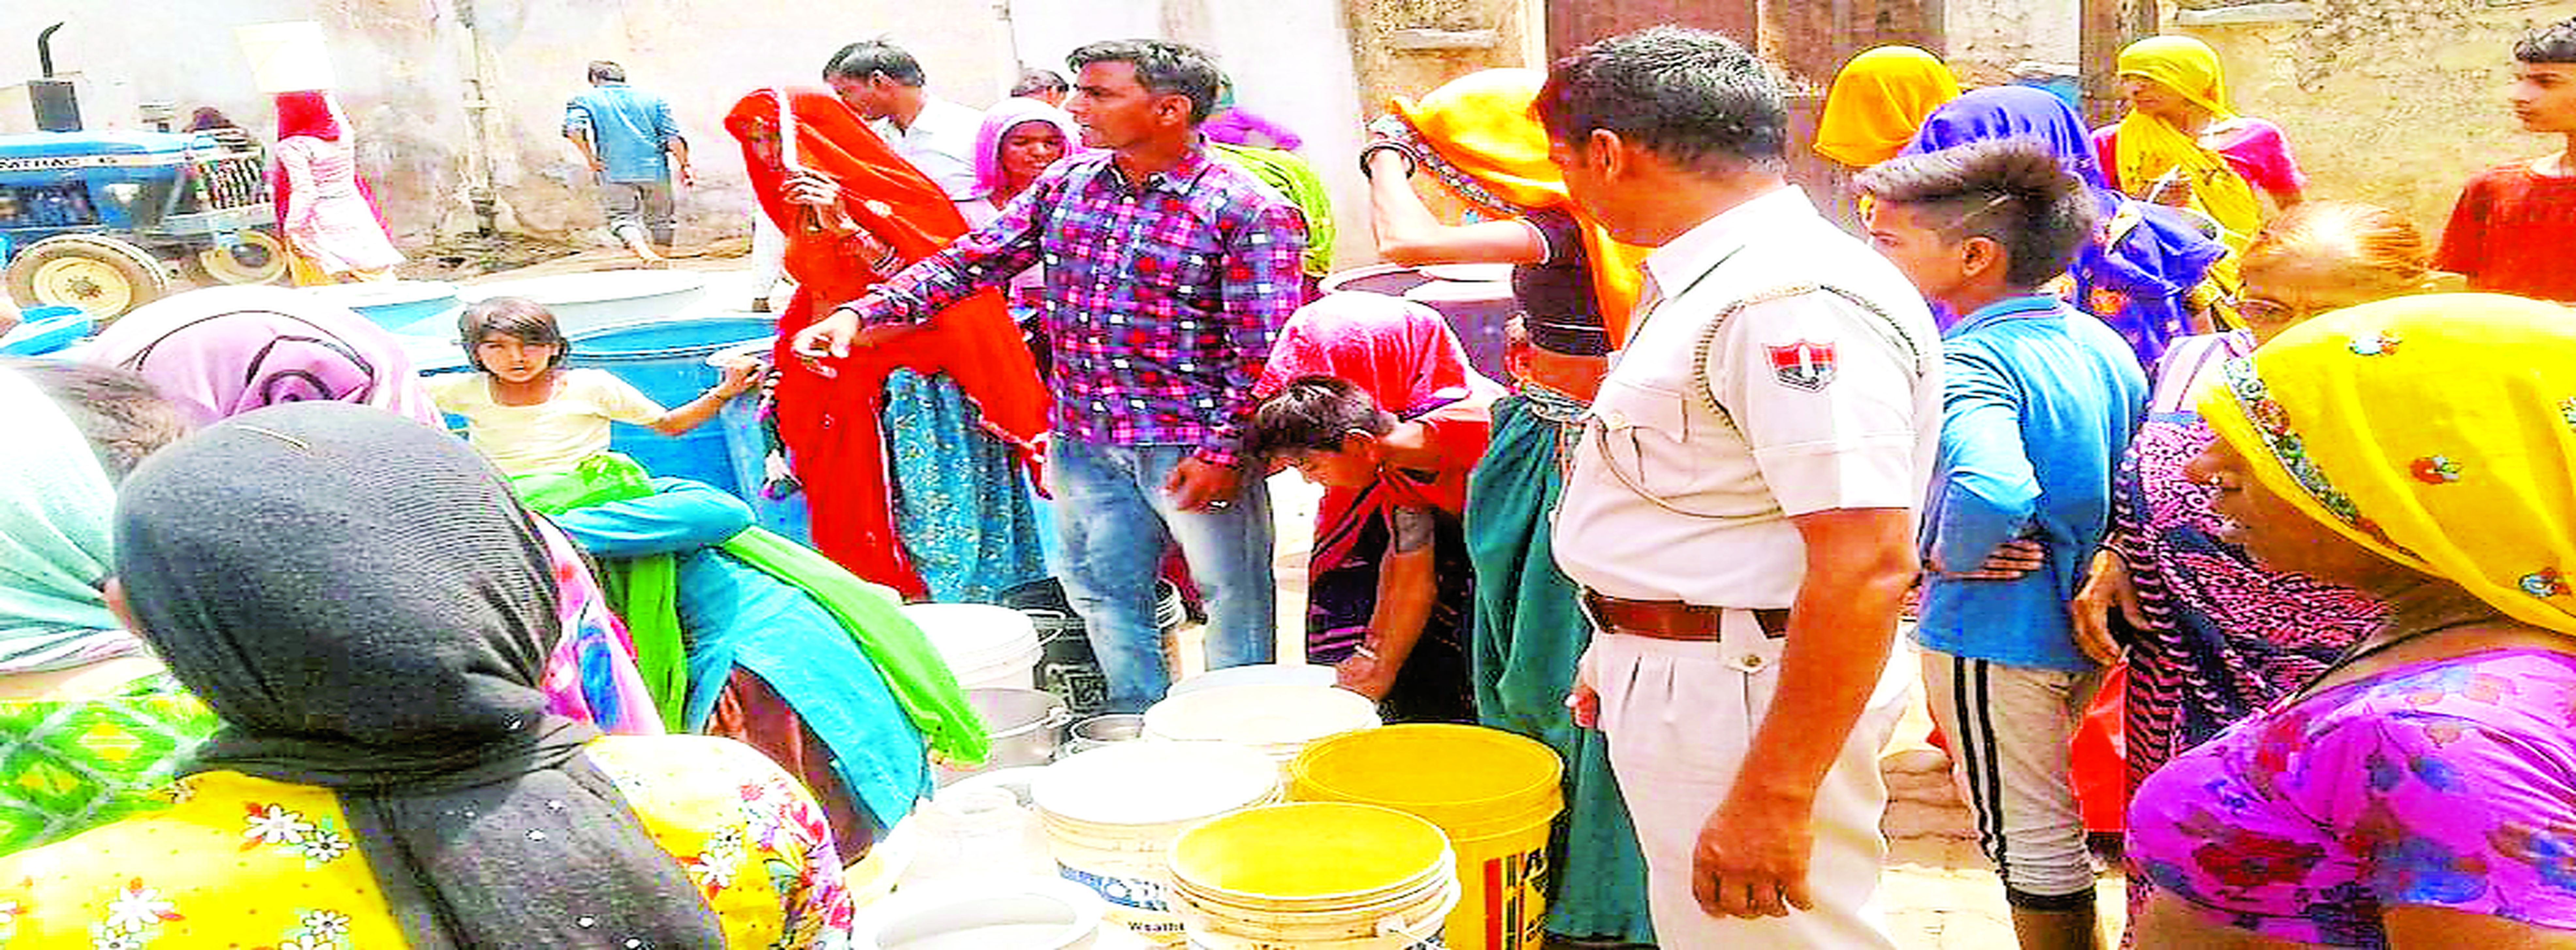 No Water supply in villages after storm in alwar